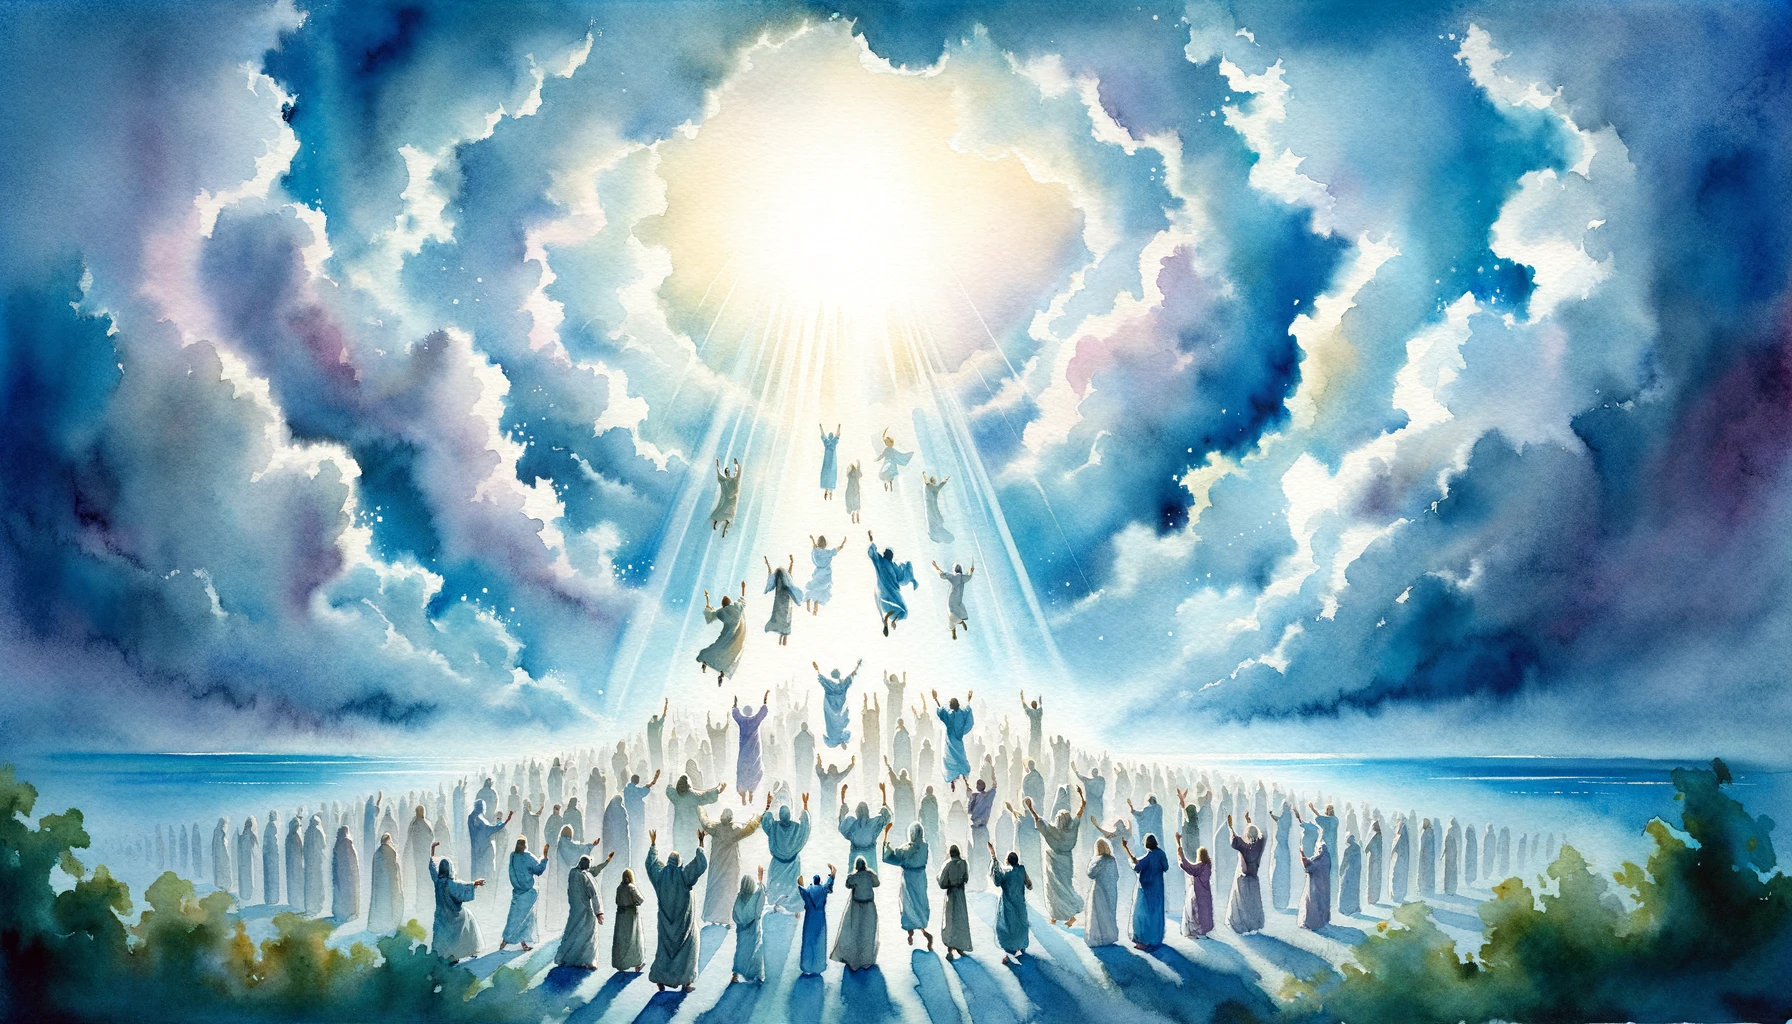 Serene sky with numerous figures being lifted upwards towards a radiant light, symbolizing the rapture and the second coming of Christ.